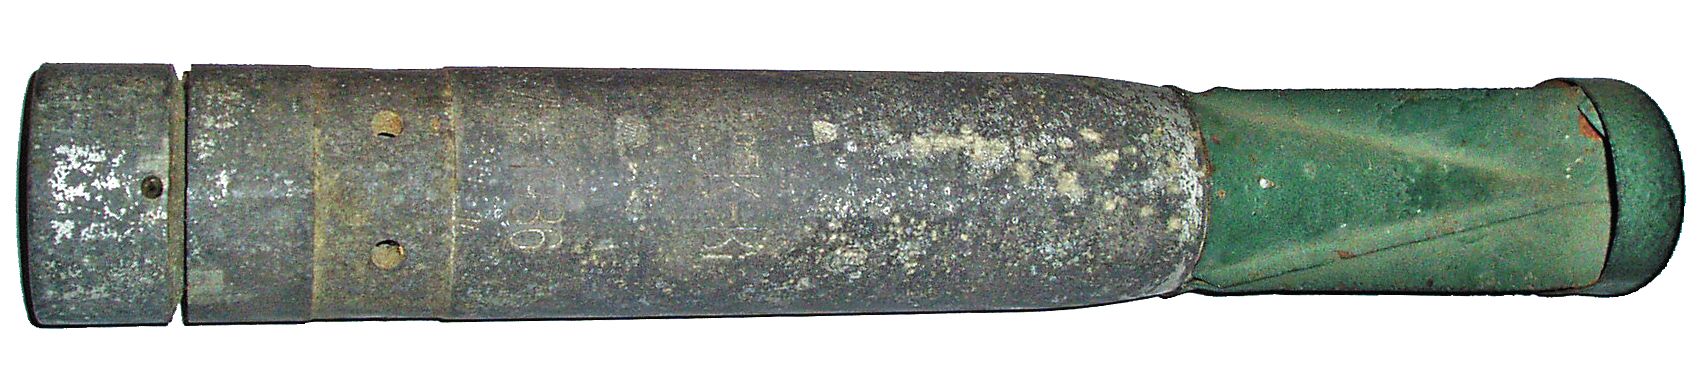 A Luftwaffe 1kg incendiary bomb (Brandbombe) presumed to be of the B1 type.